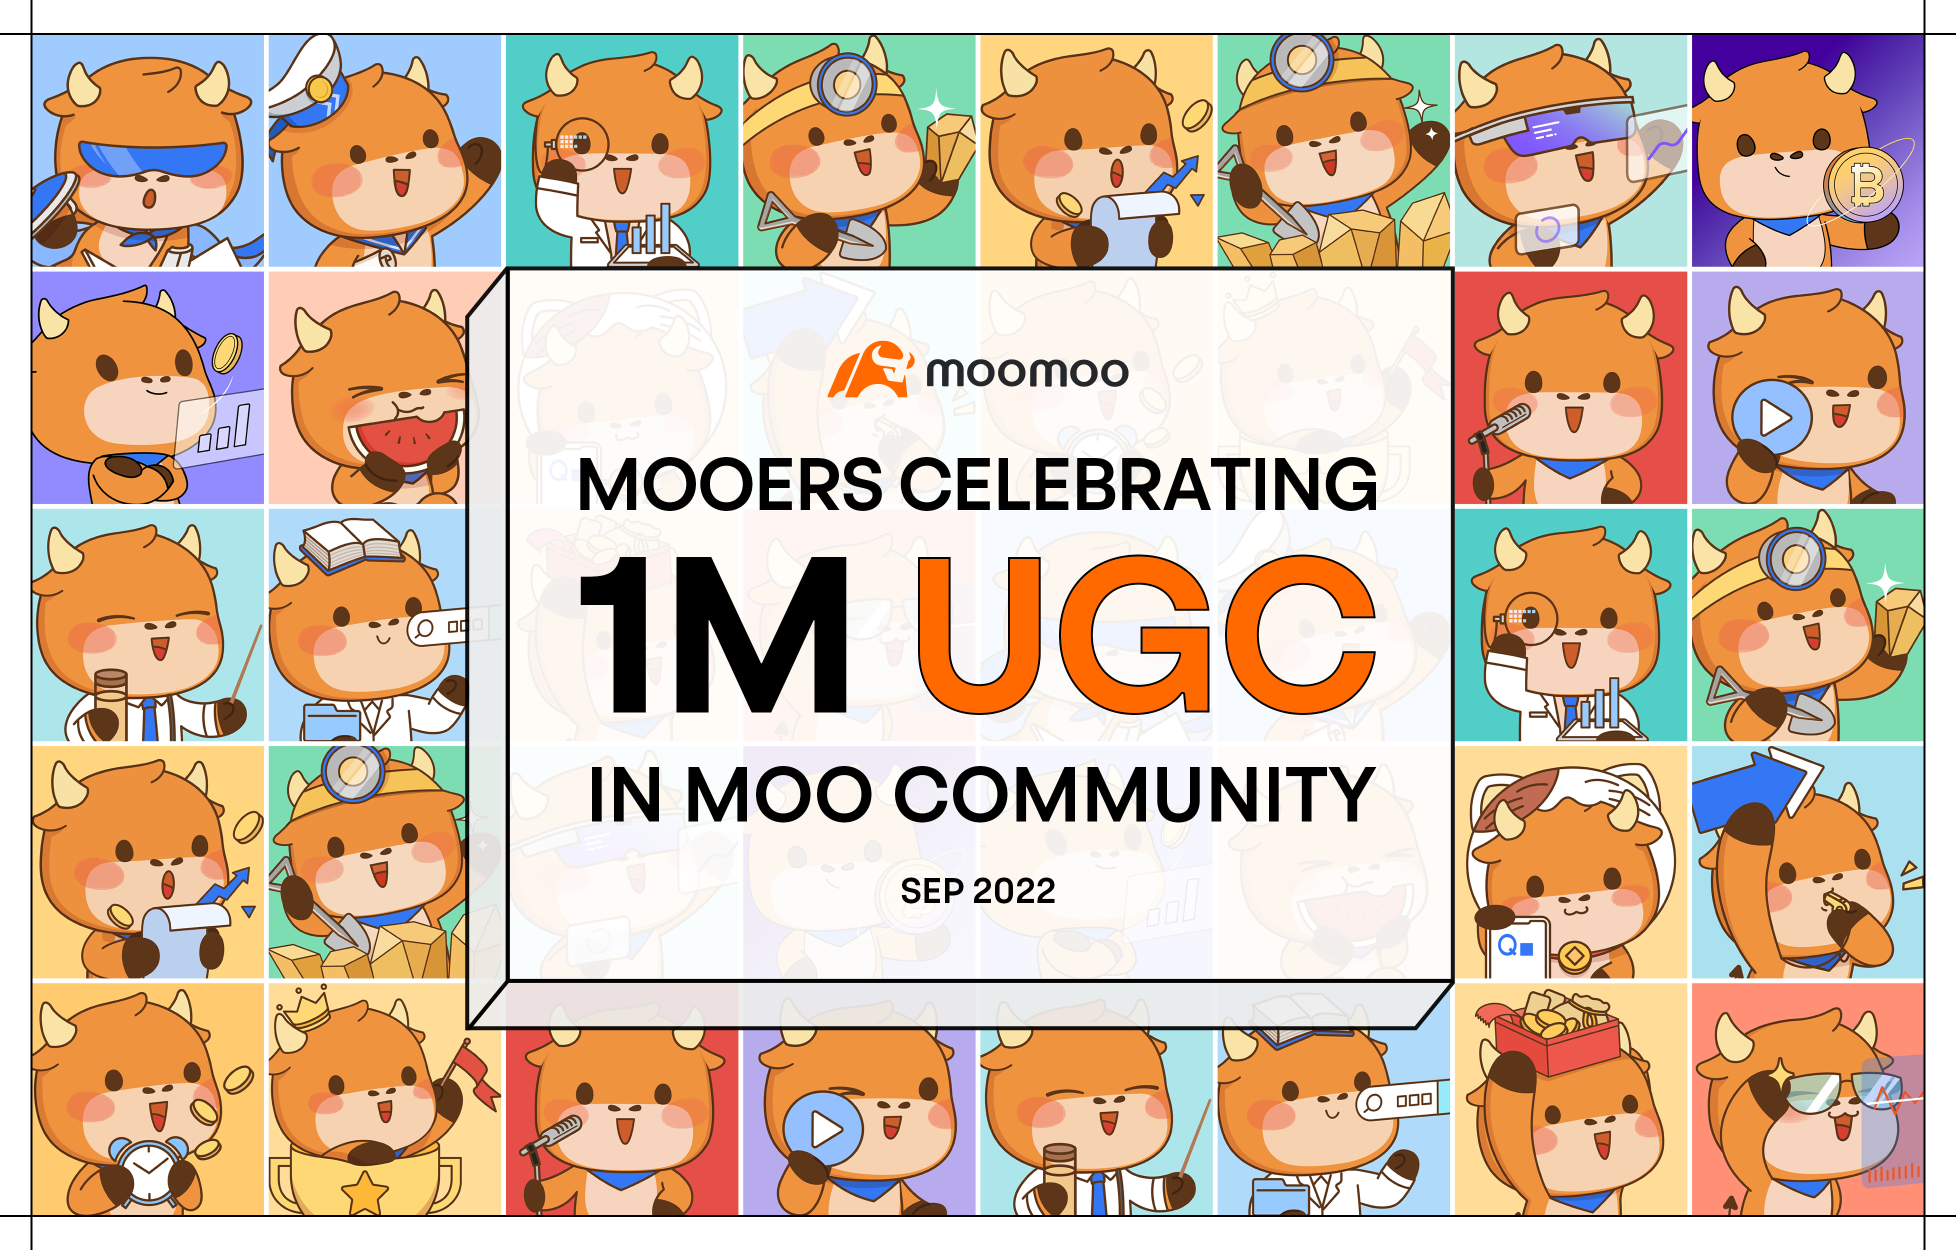 Thank you for creating 1 million pieces of UGC